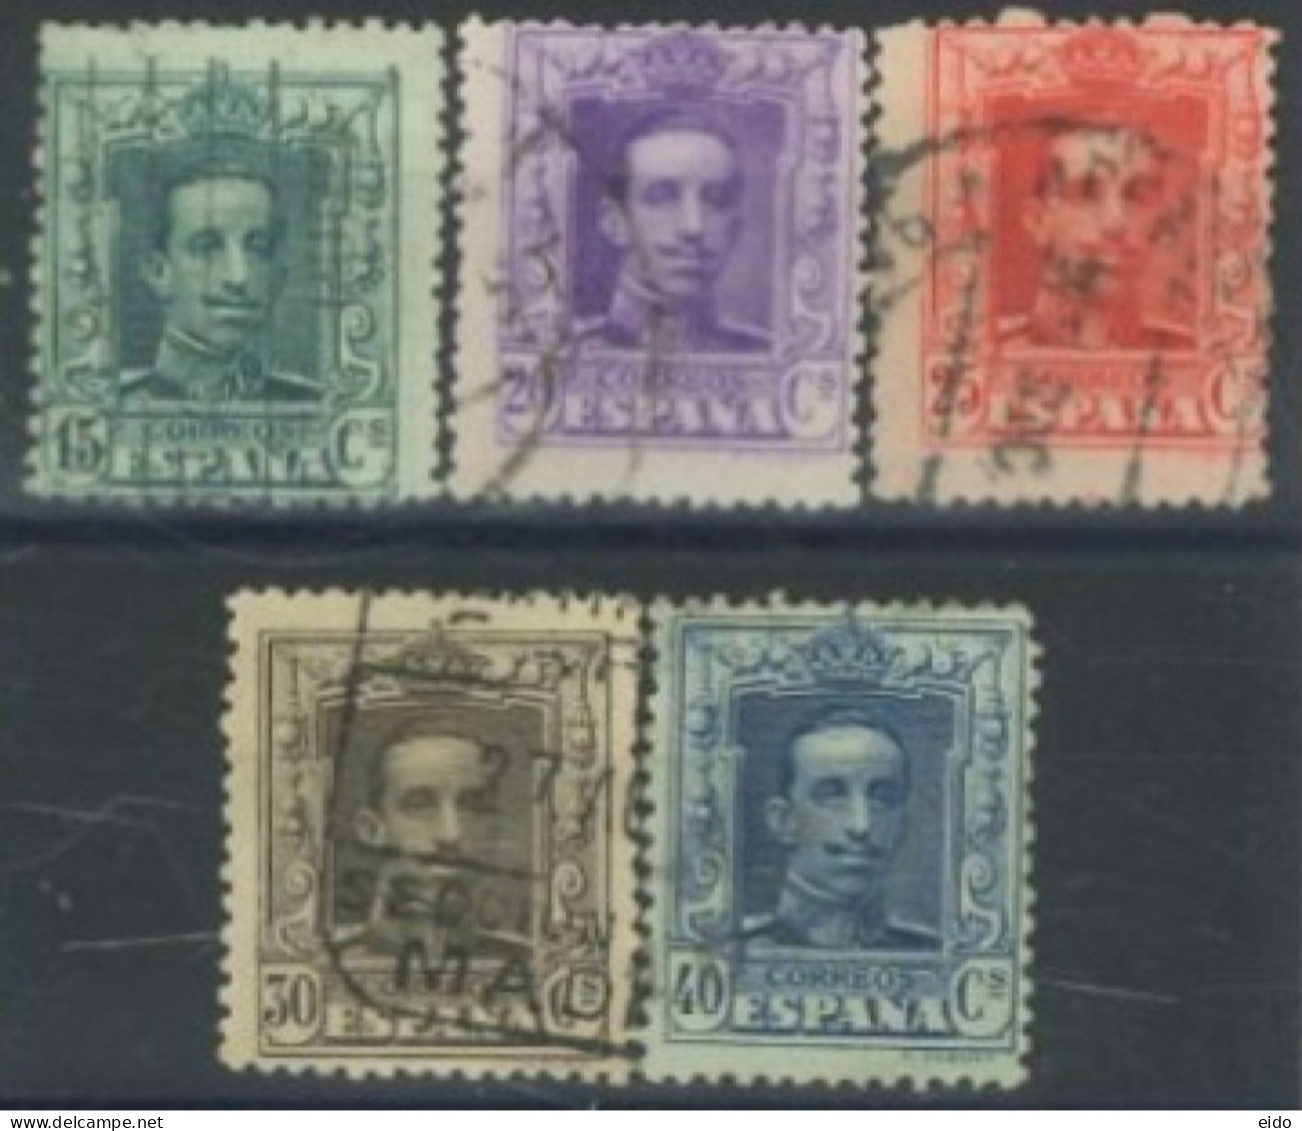 SPAIN, 1922/26, KING ALFONSO XIII STAMPS SET OF 5 # 336/40, USED. - Usati